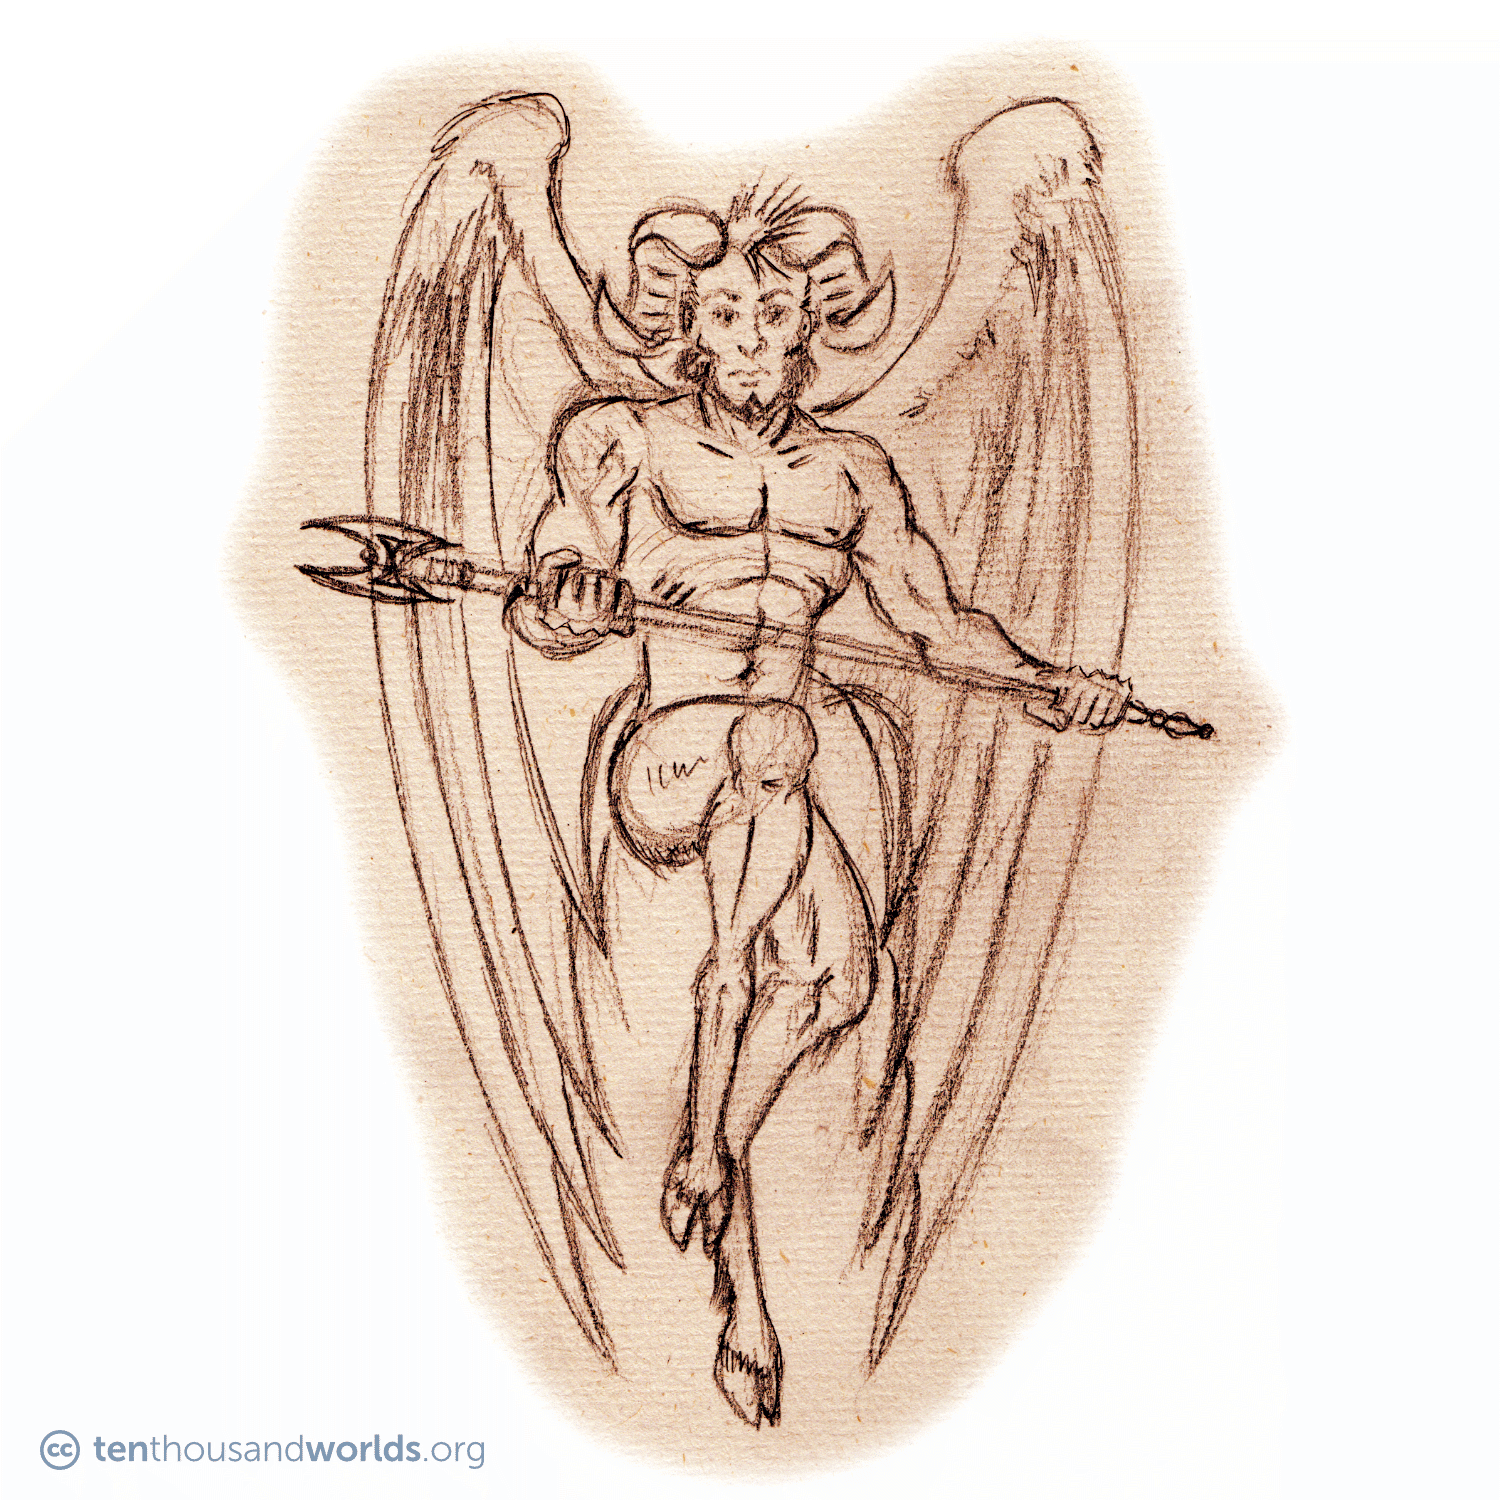 A pencil sketch of a creature with the upper body and head of a man, ram’s horns, the legs of a goat, and bat-like wings edged in feathers. He grips an elaborate staff.